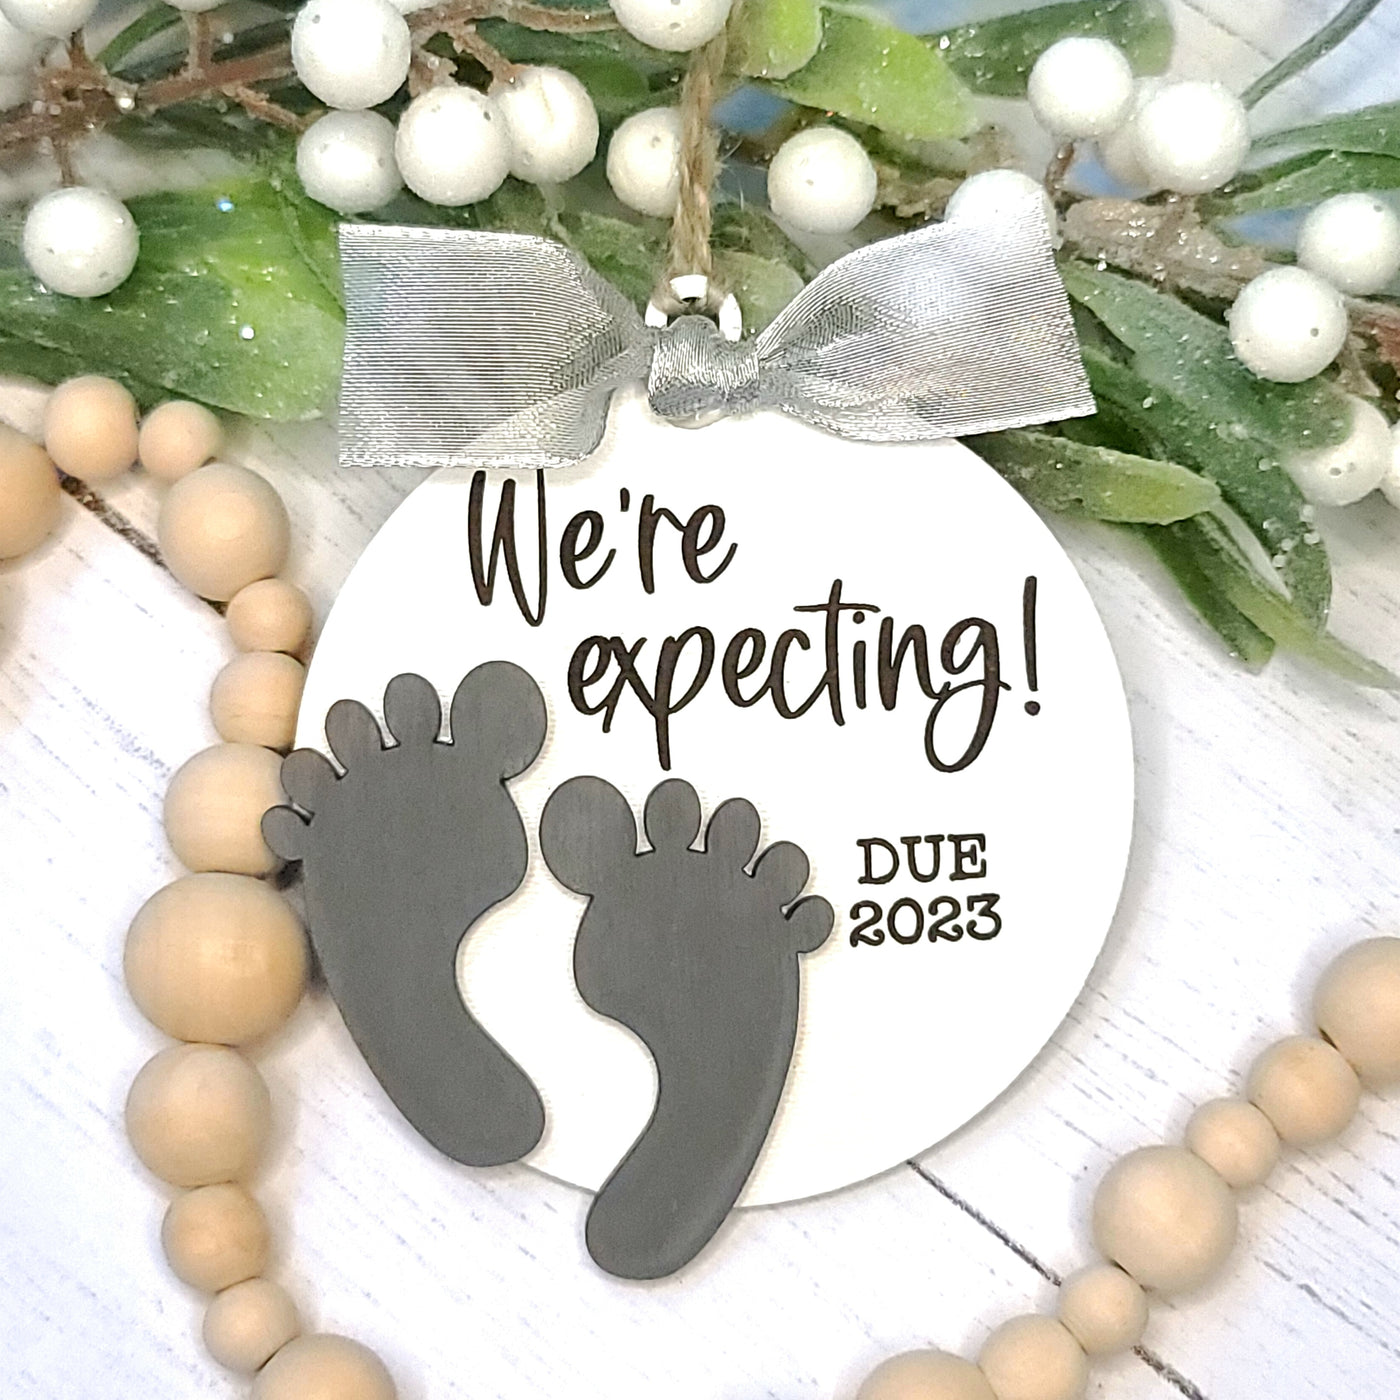 Coming Soon Pregnancy Christmas Ornament | Personalized Laser Cut Wood Ornament